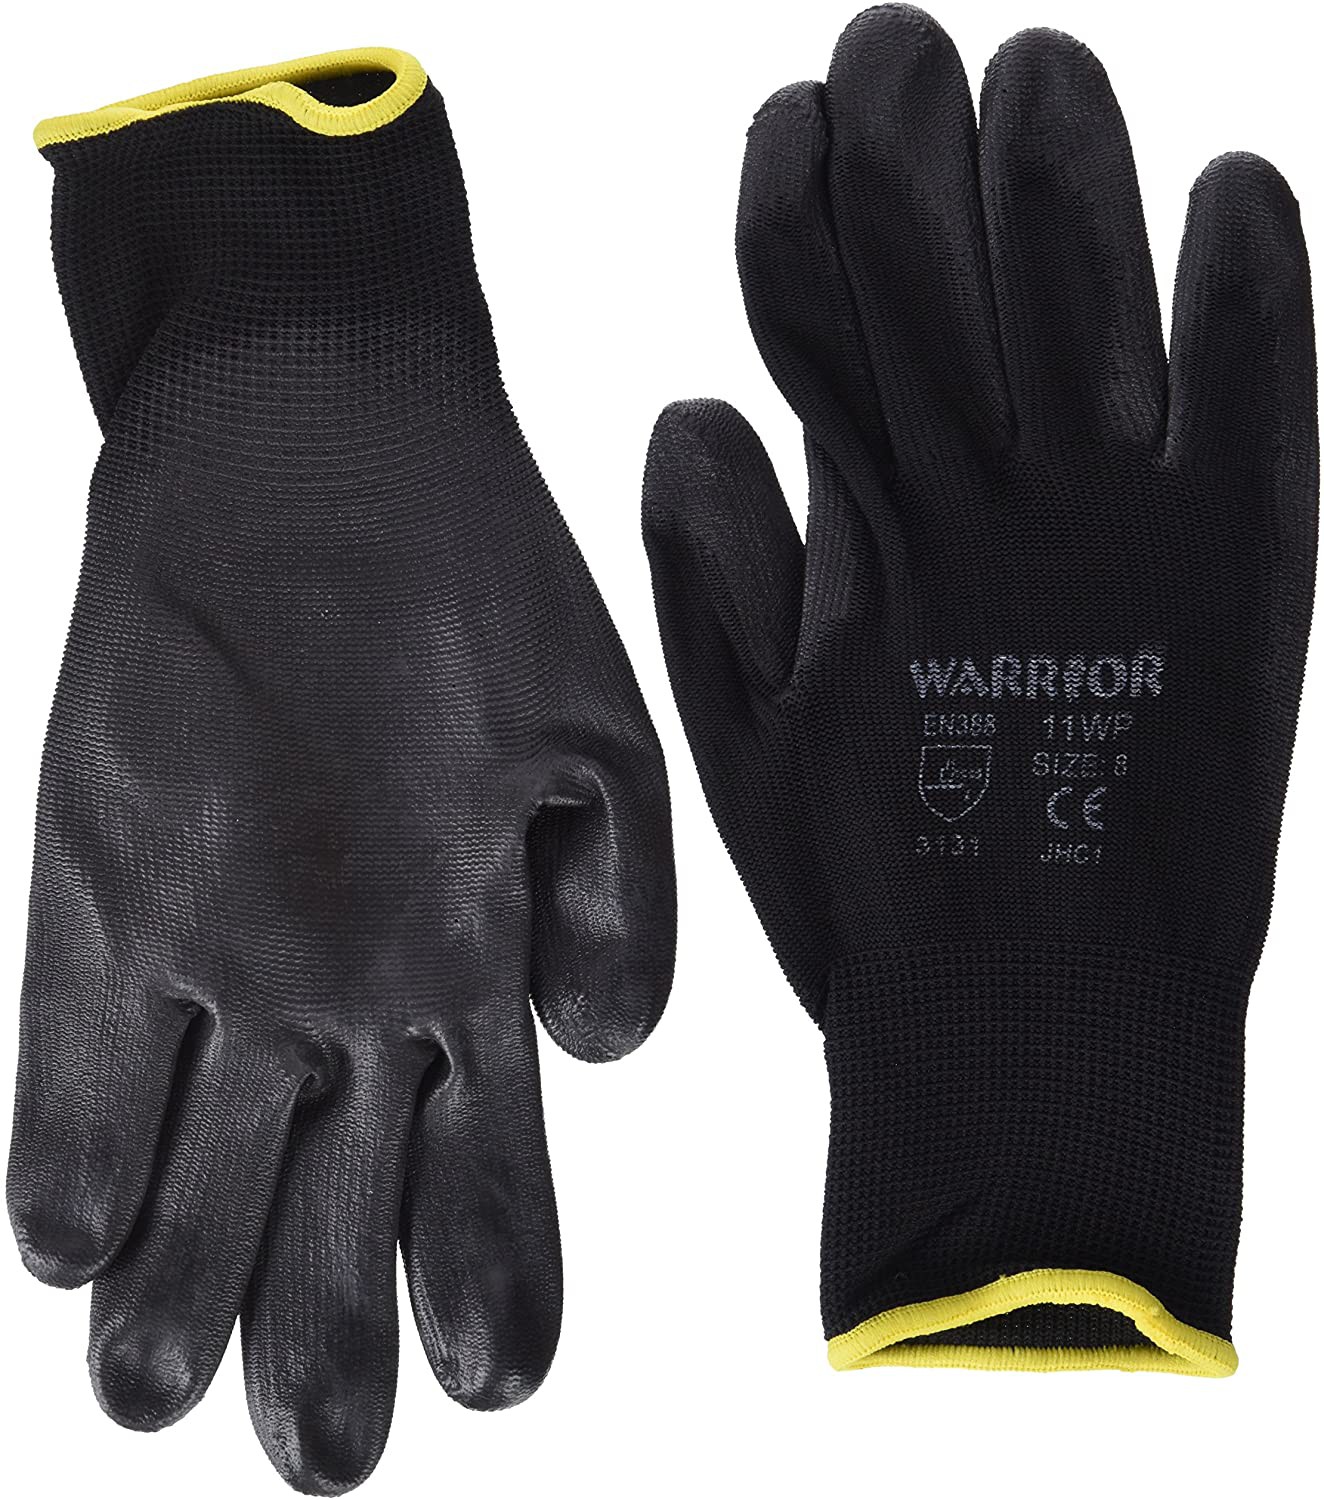 Warrior+Knitted+Gloves+0111WD+Small-+Size+7+